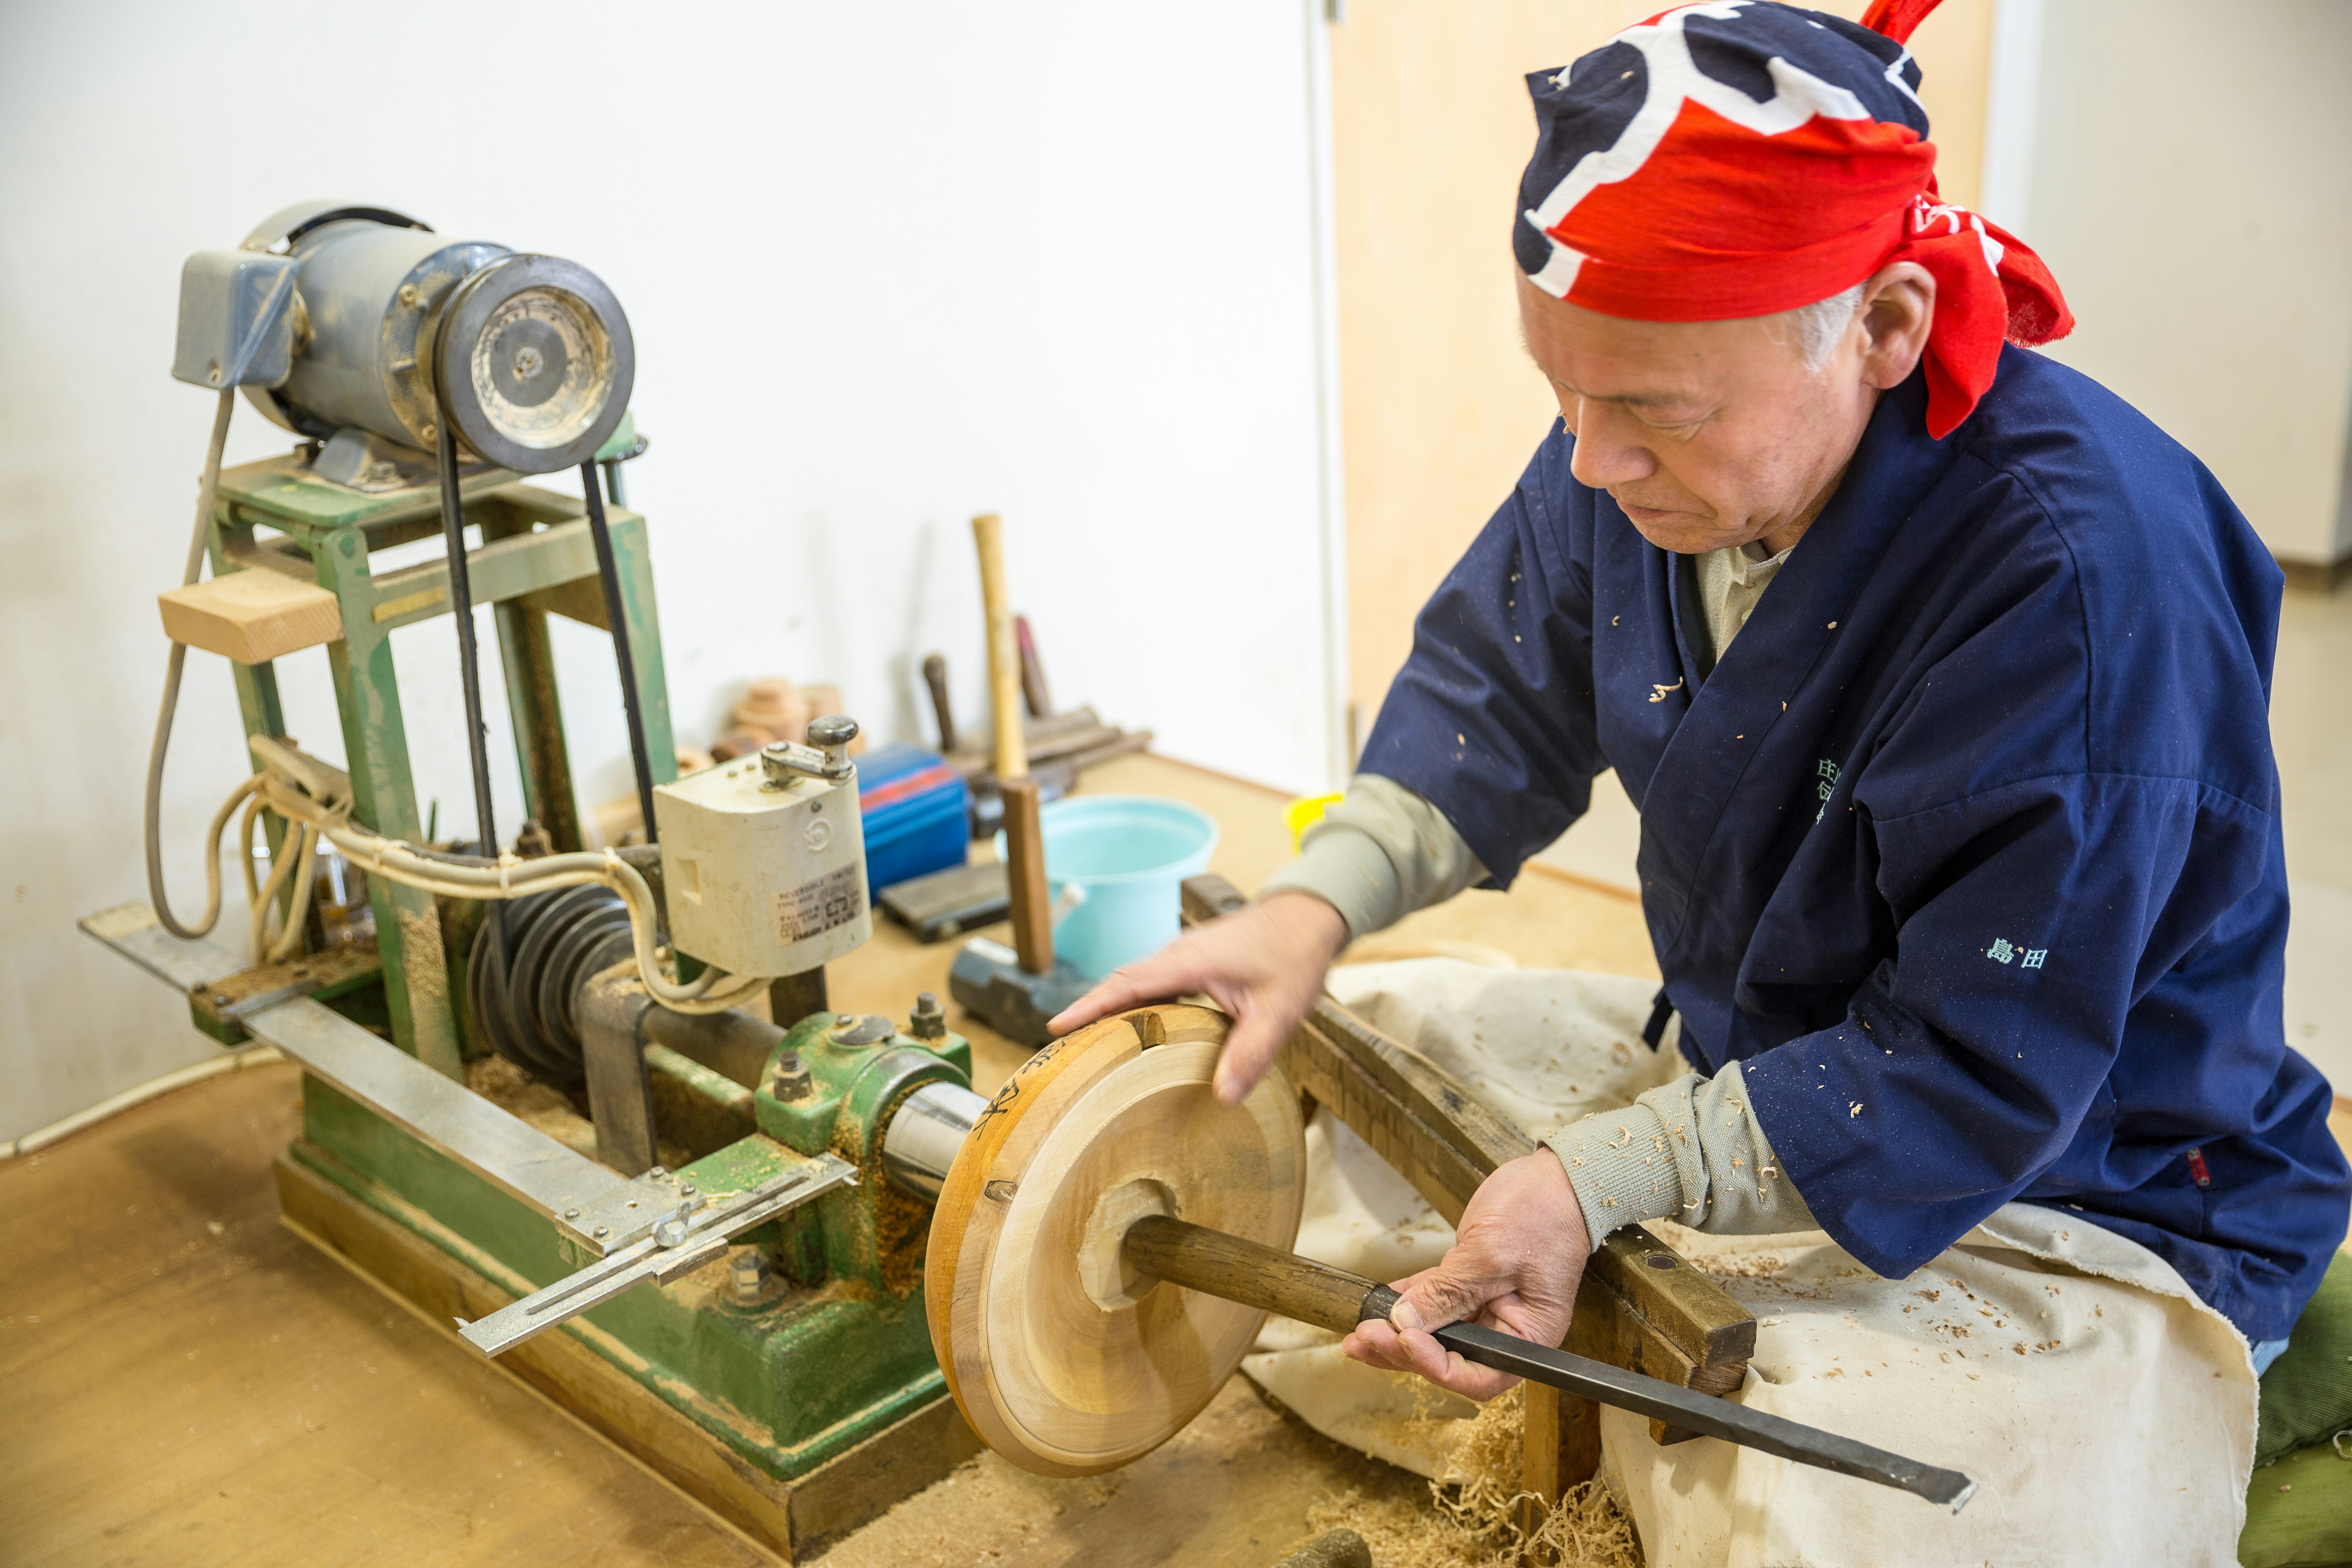 A craftsman wearing blue overalls and a bandana leans over some tools where the base of a bowl can be seen